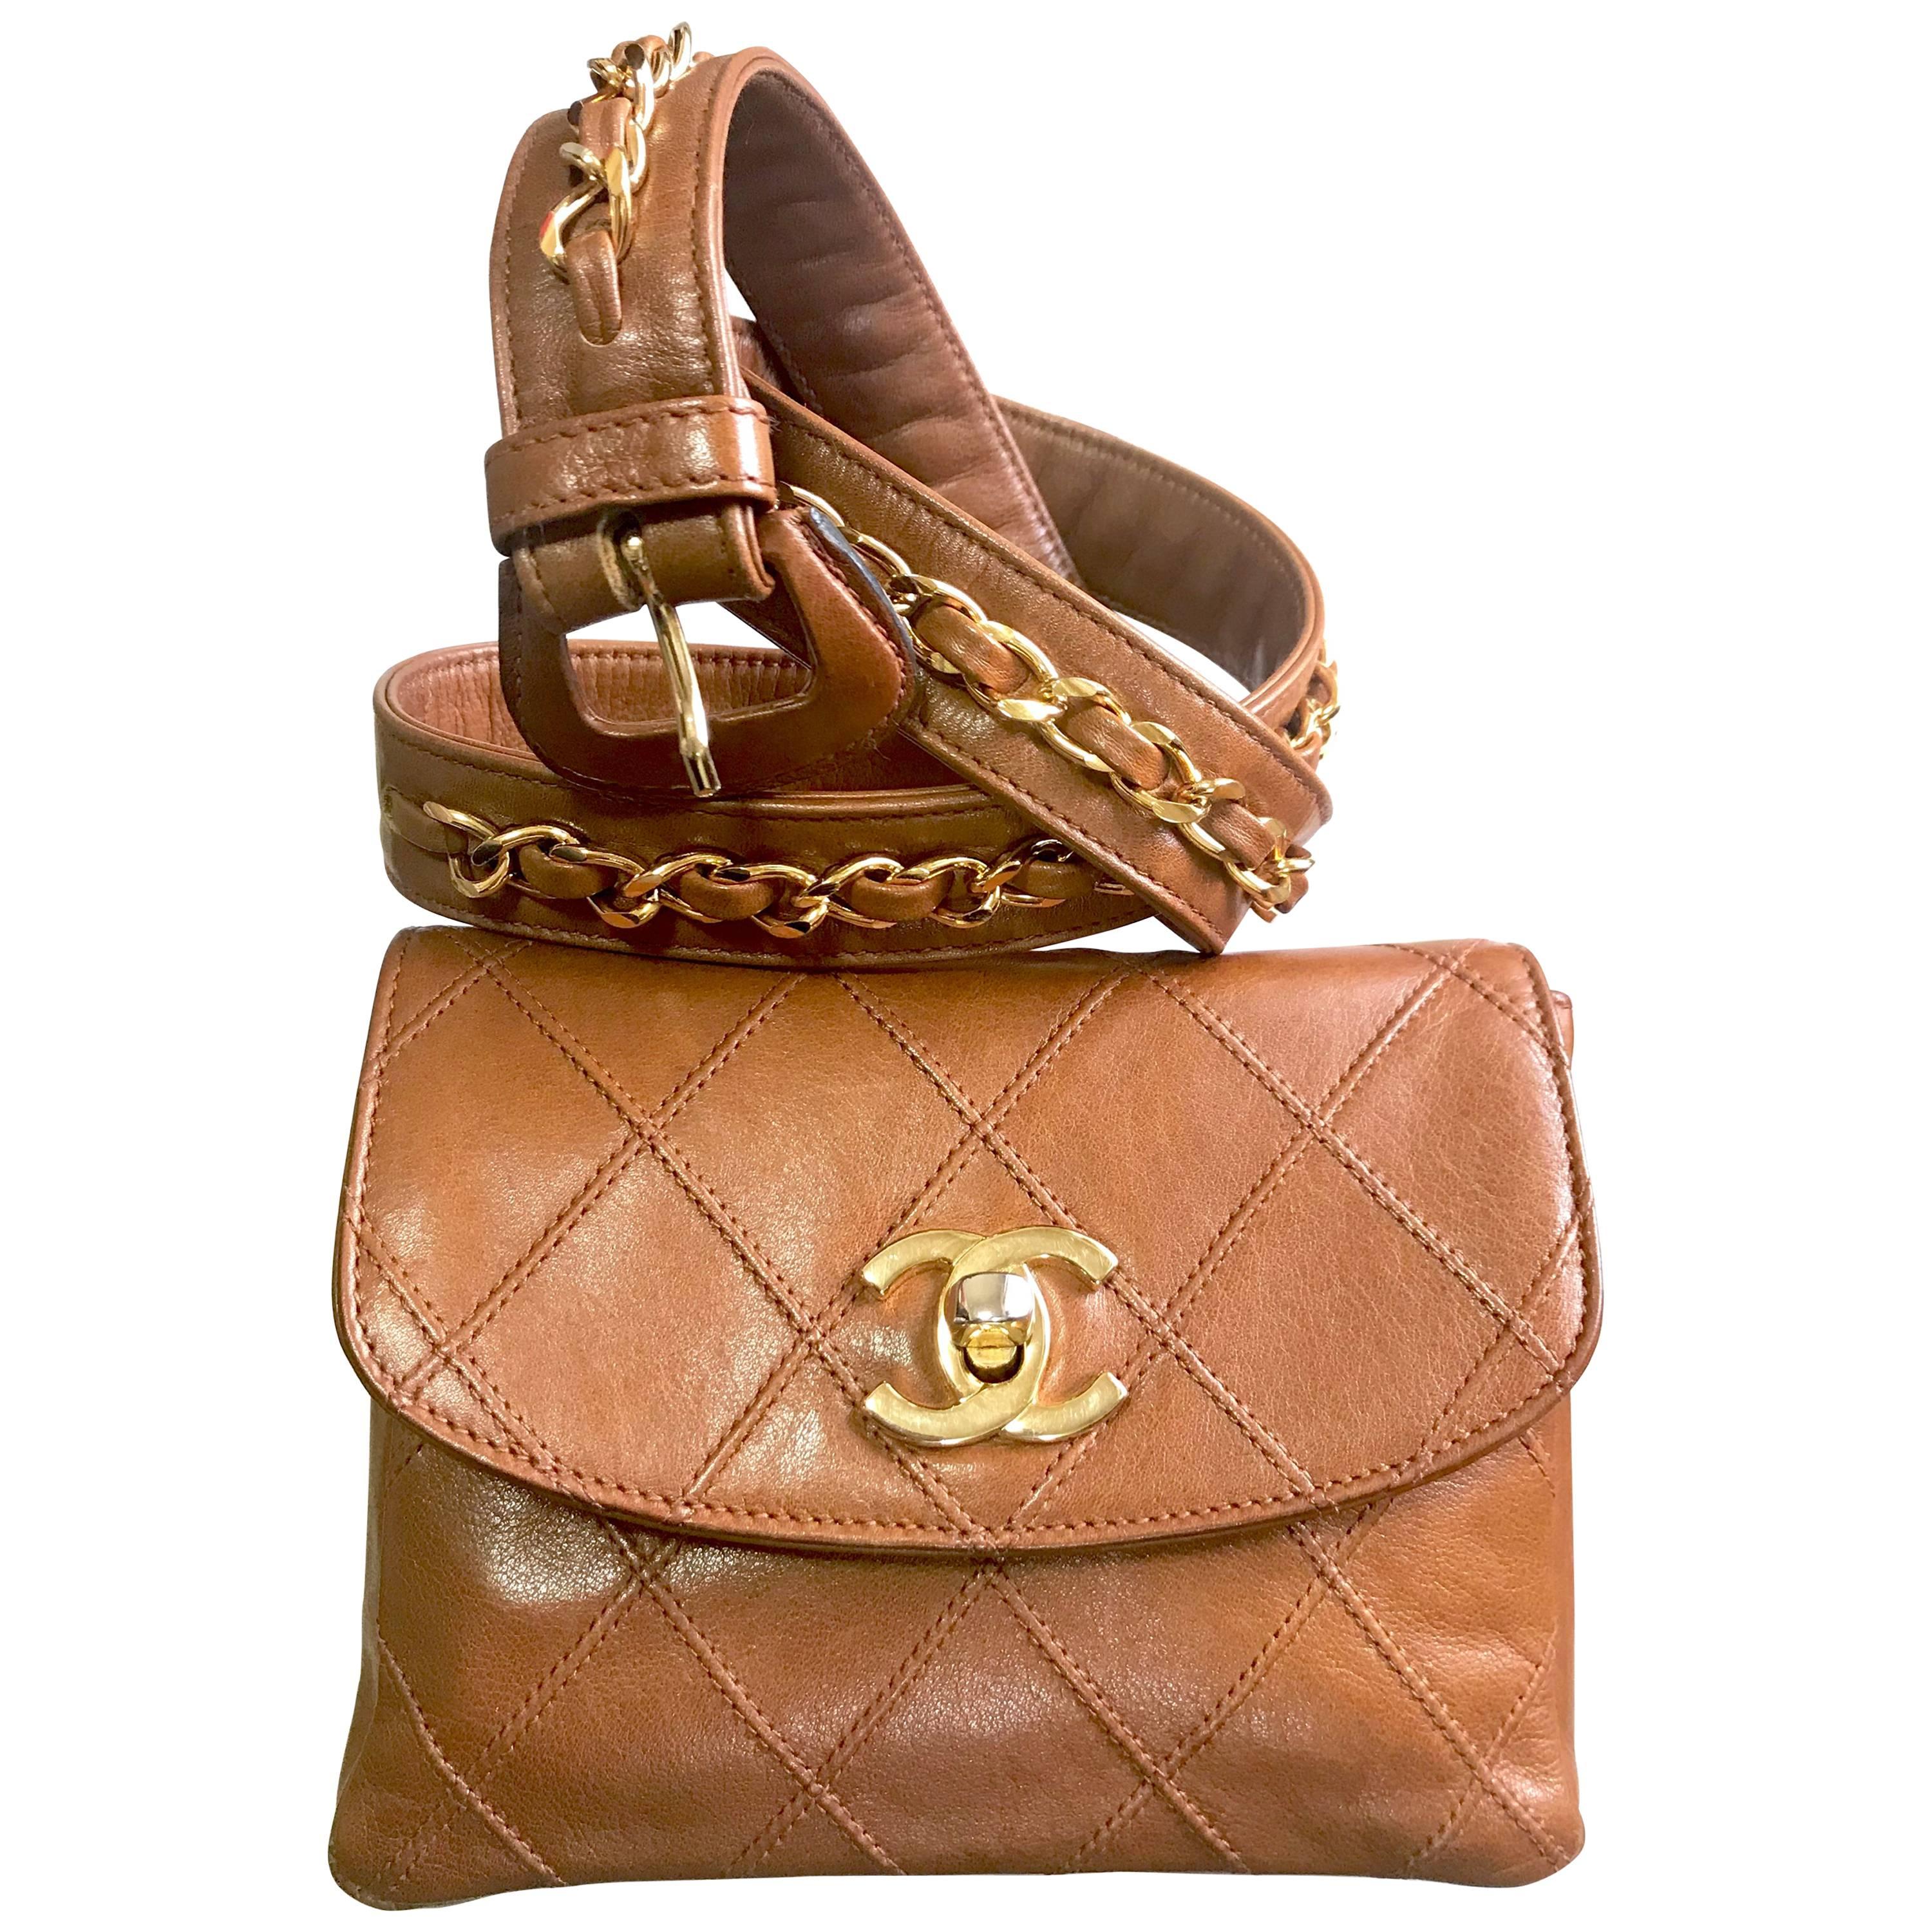 Chanel Vintage brown belt fanny pack hip bag with gold CC motif and chains